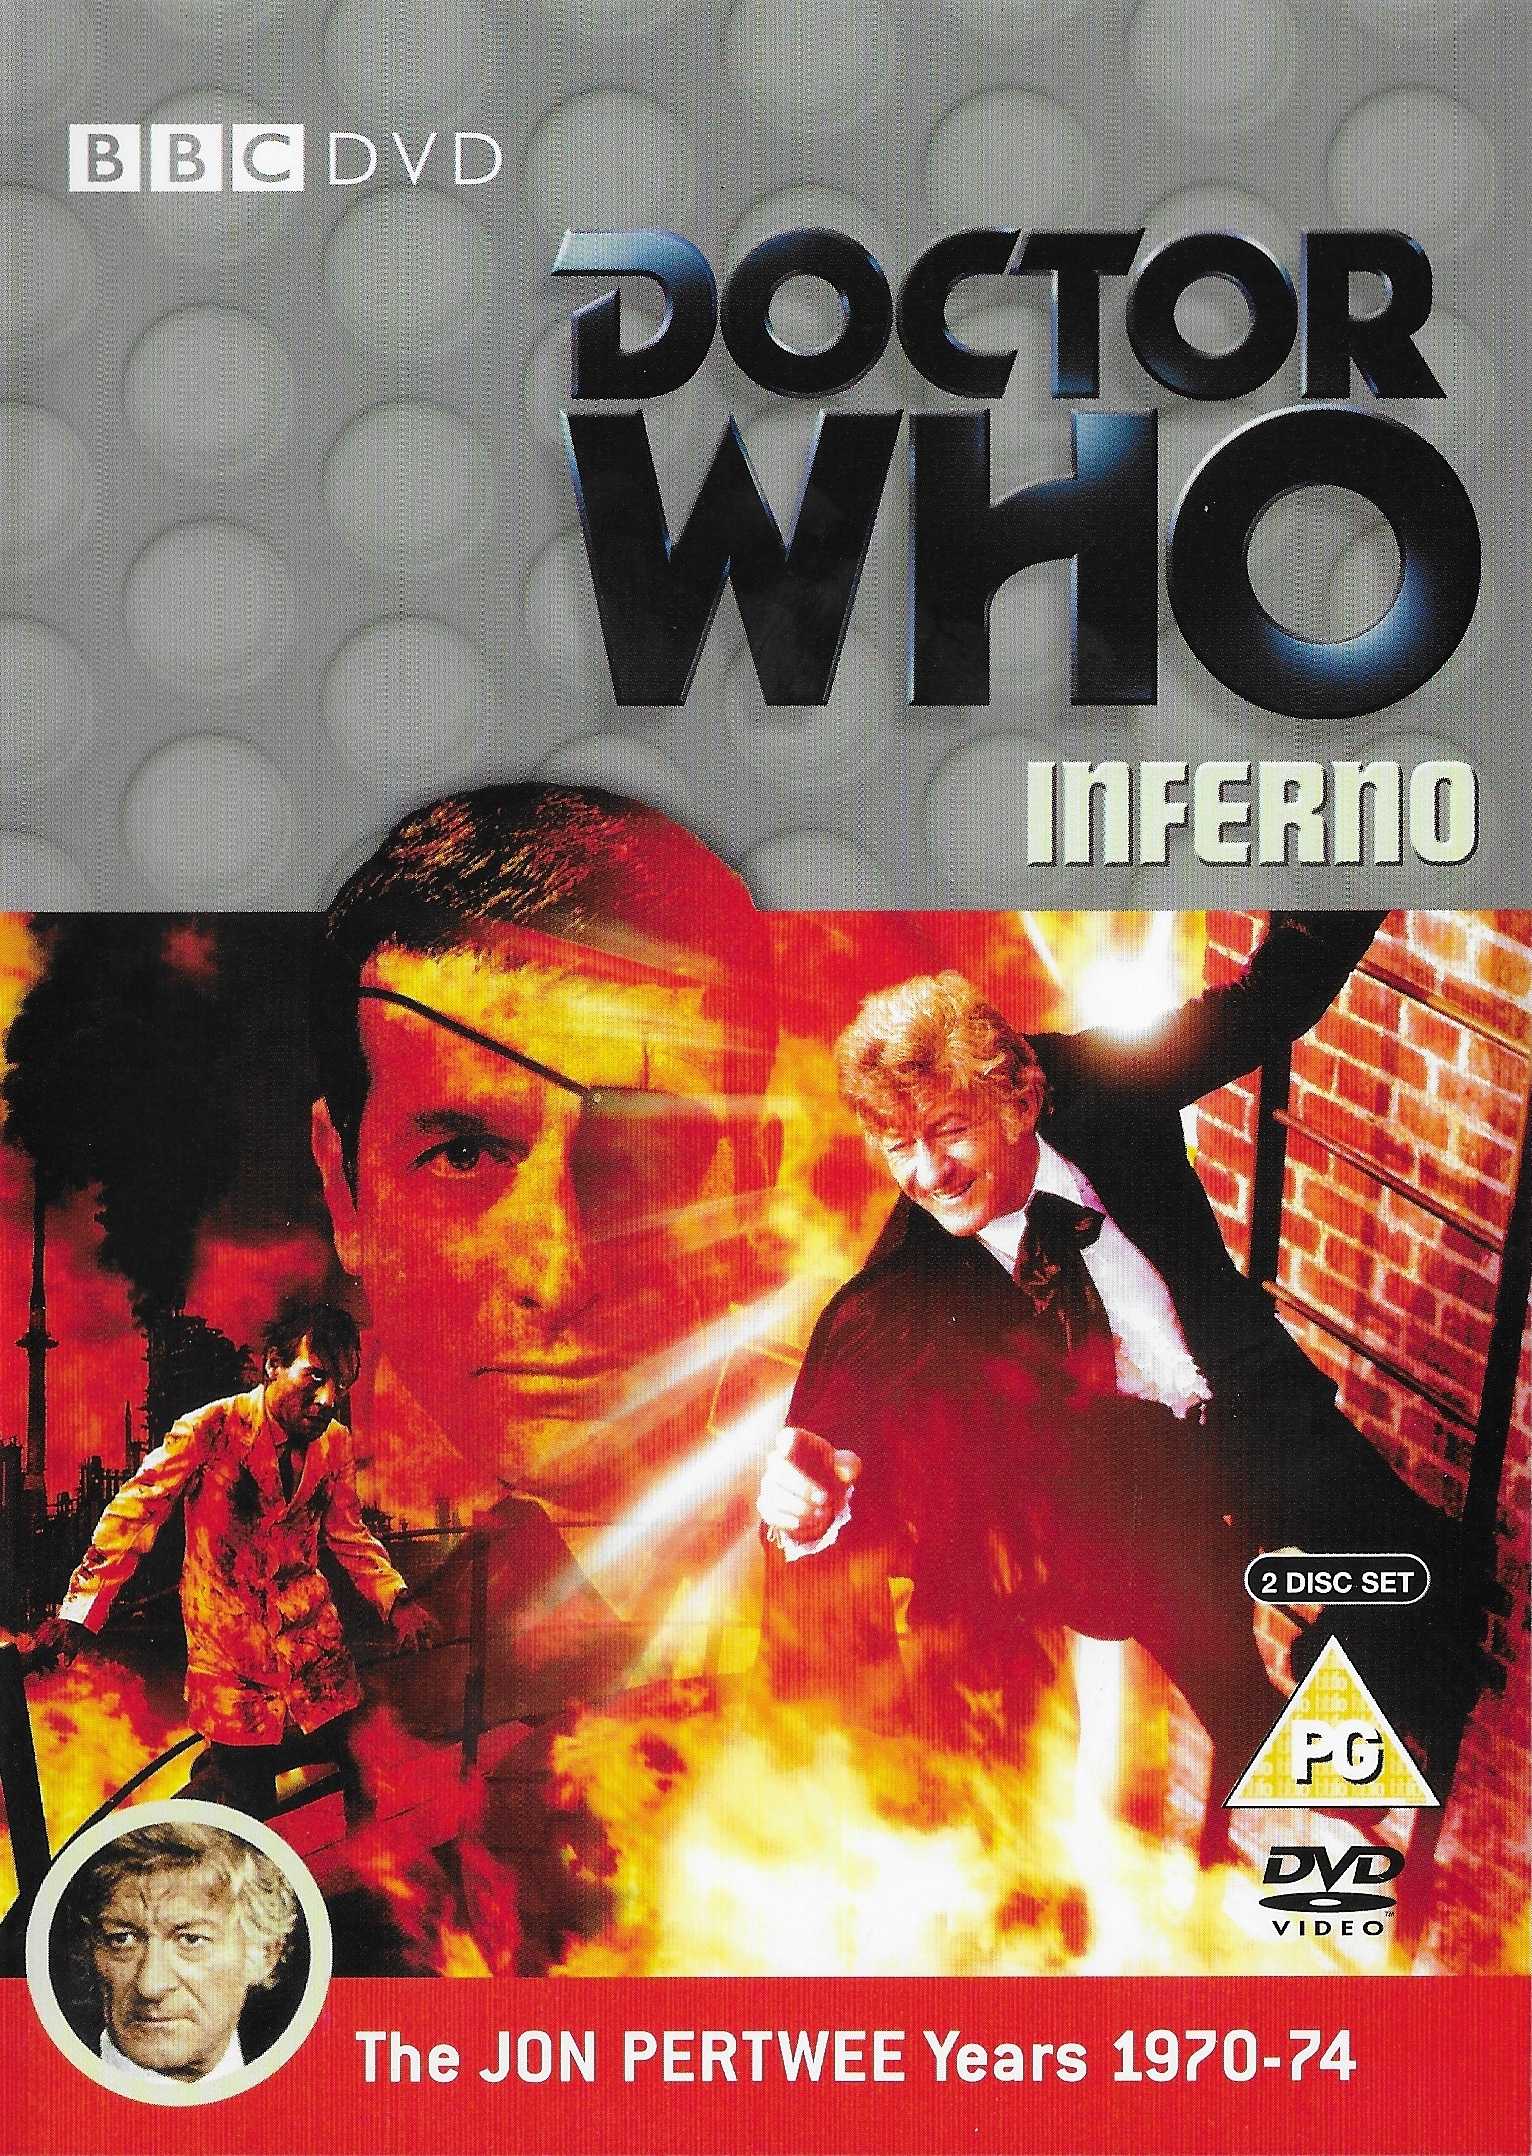 Picture of BBCDVD 1802 Doctor Who - Inferno by artist Don Houghton from the BBC records and Tapes library